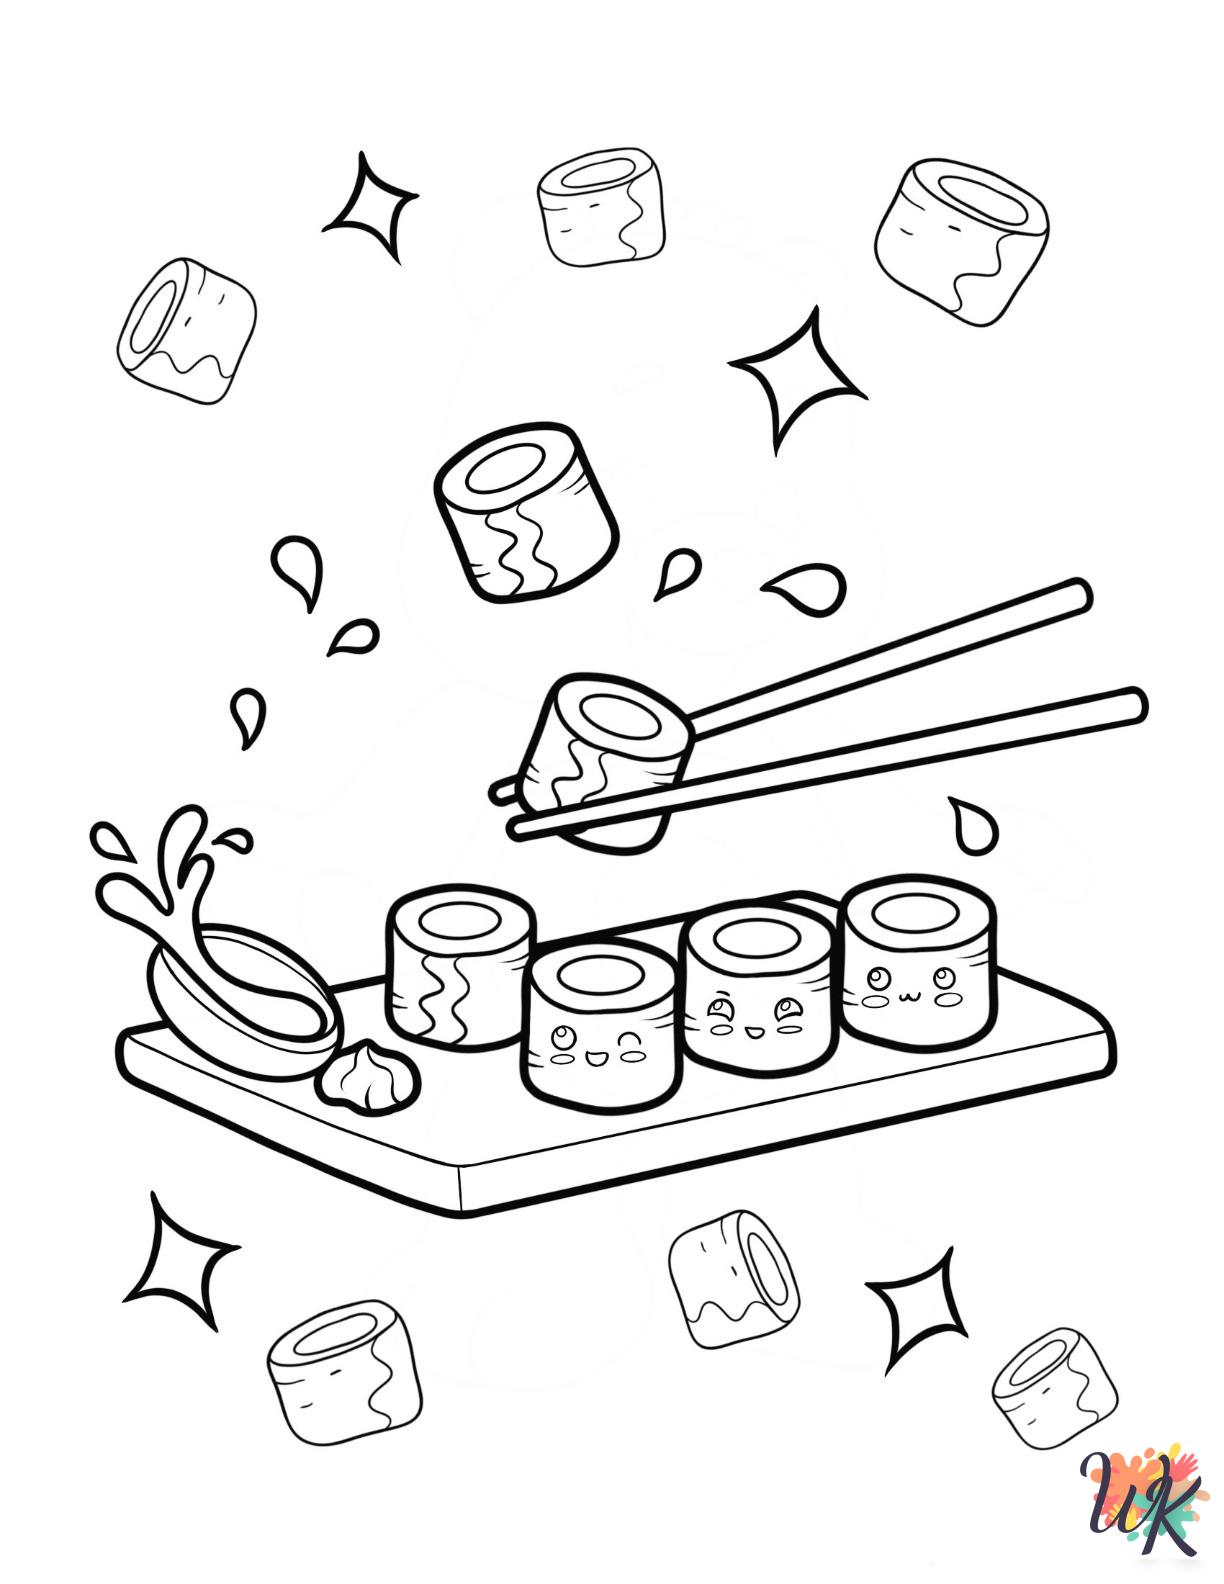 Sushi coloring pages for kids